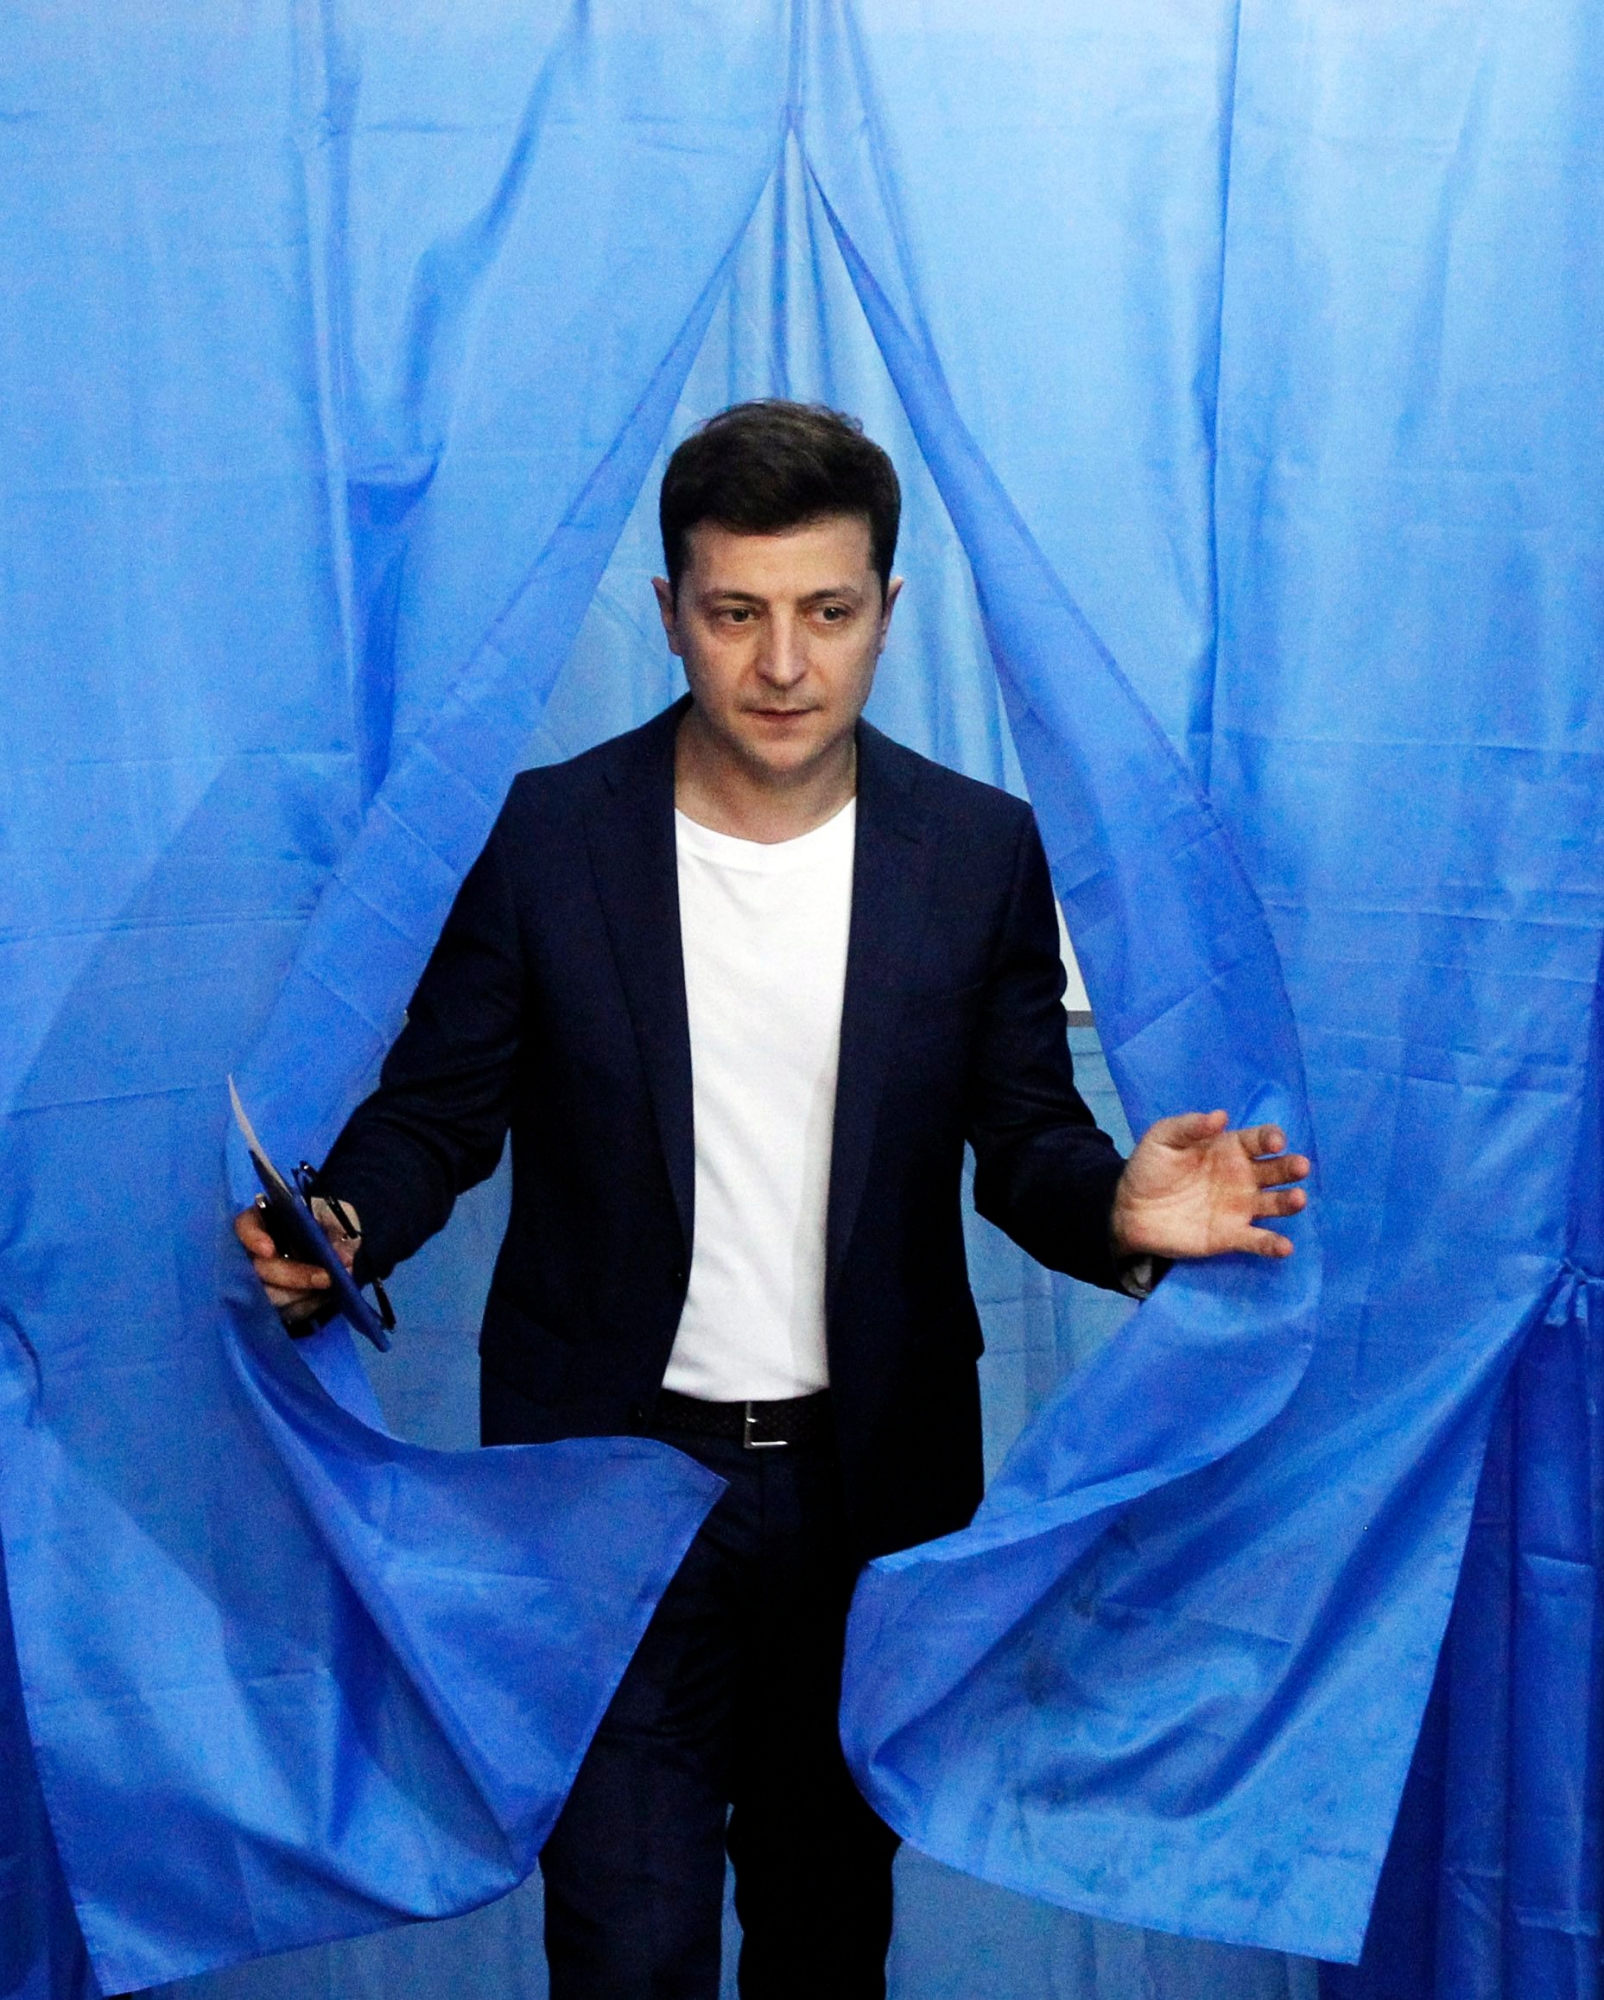 epa07519107 Ukrainian Presidential candidate Volodymyr Zelensky walks out of a voting booth at a polling station during Presidential elections in Kiev, Ukraine, 21 April 2019. Ukrainians vote in the second round of Presidential elections on 21 April 2019. After the first round of elections, showman Volodymyr Zelensky is a frontrunner with 30.24 percent of votes and incumbent president Petro Poroshenko is a runner-up with 15.95 percent of votes.  EPA/STEPAN FRANKO UKRAINE PRESIDENT ELECTIONS